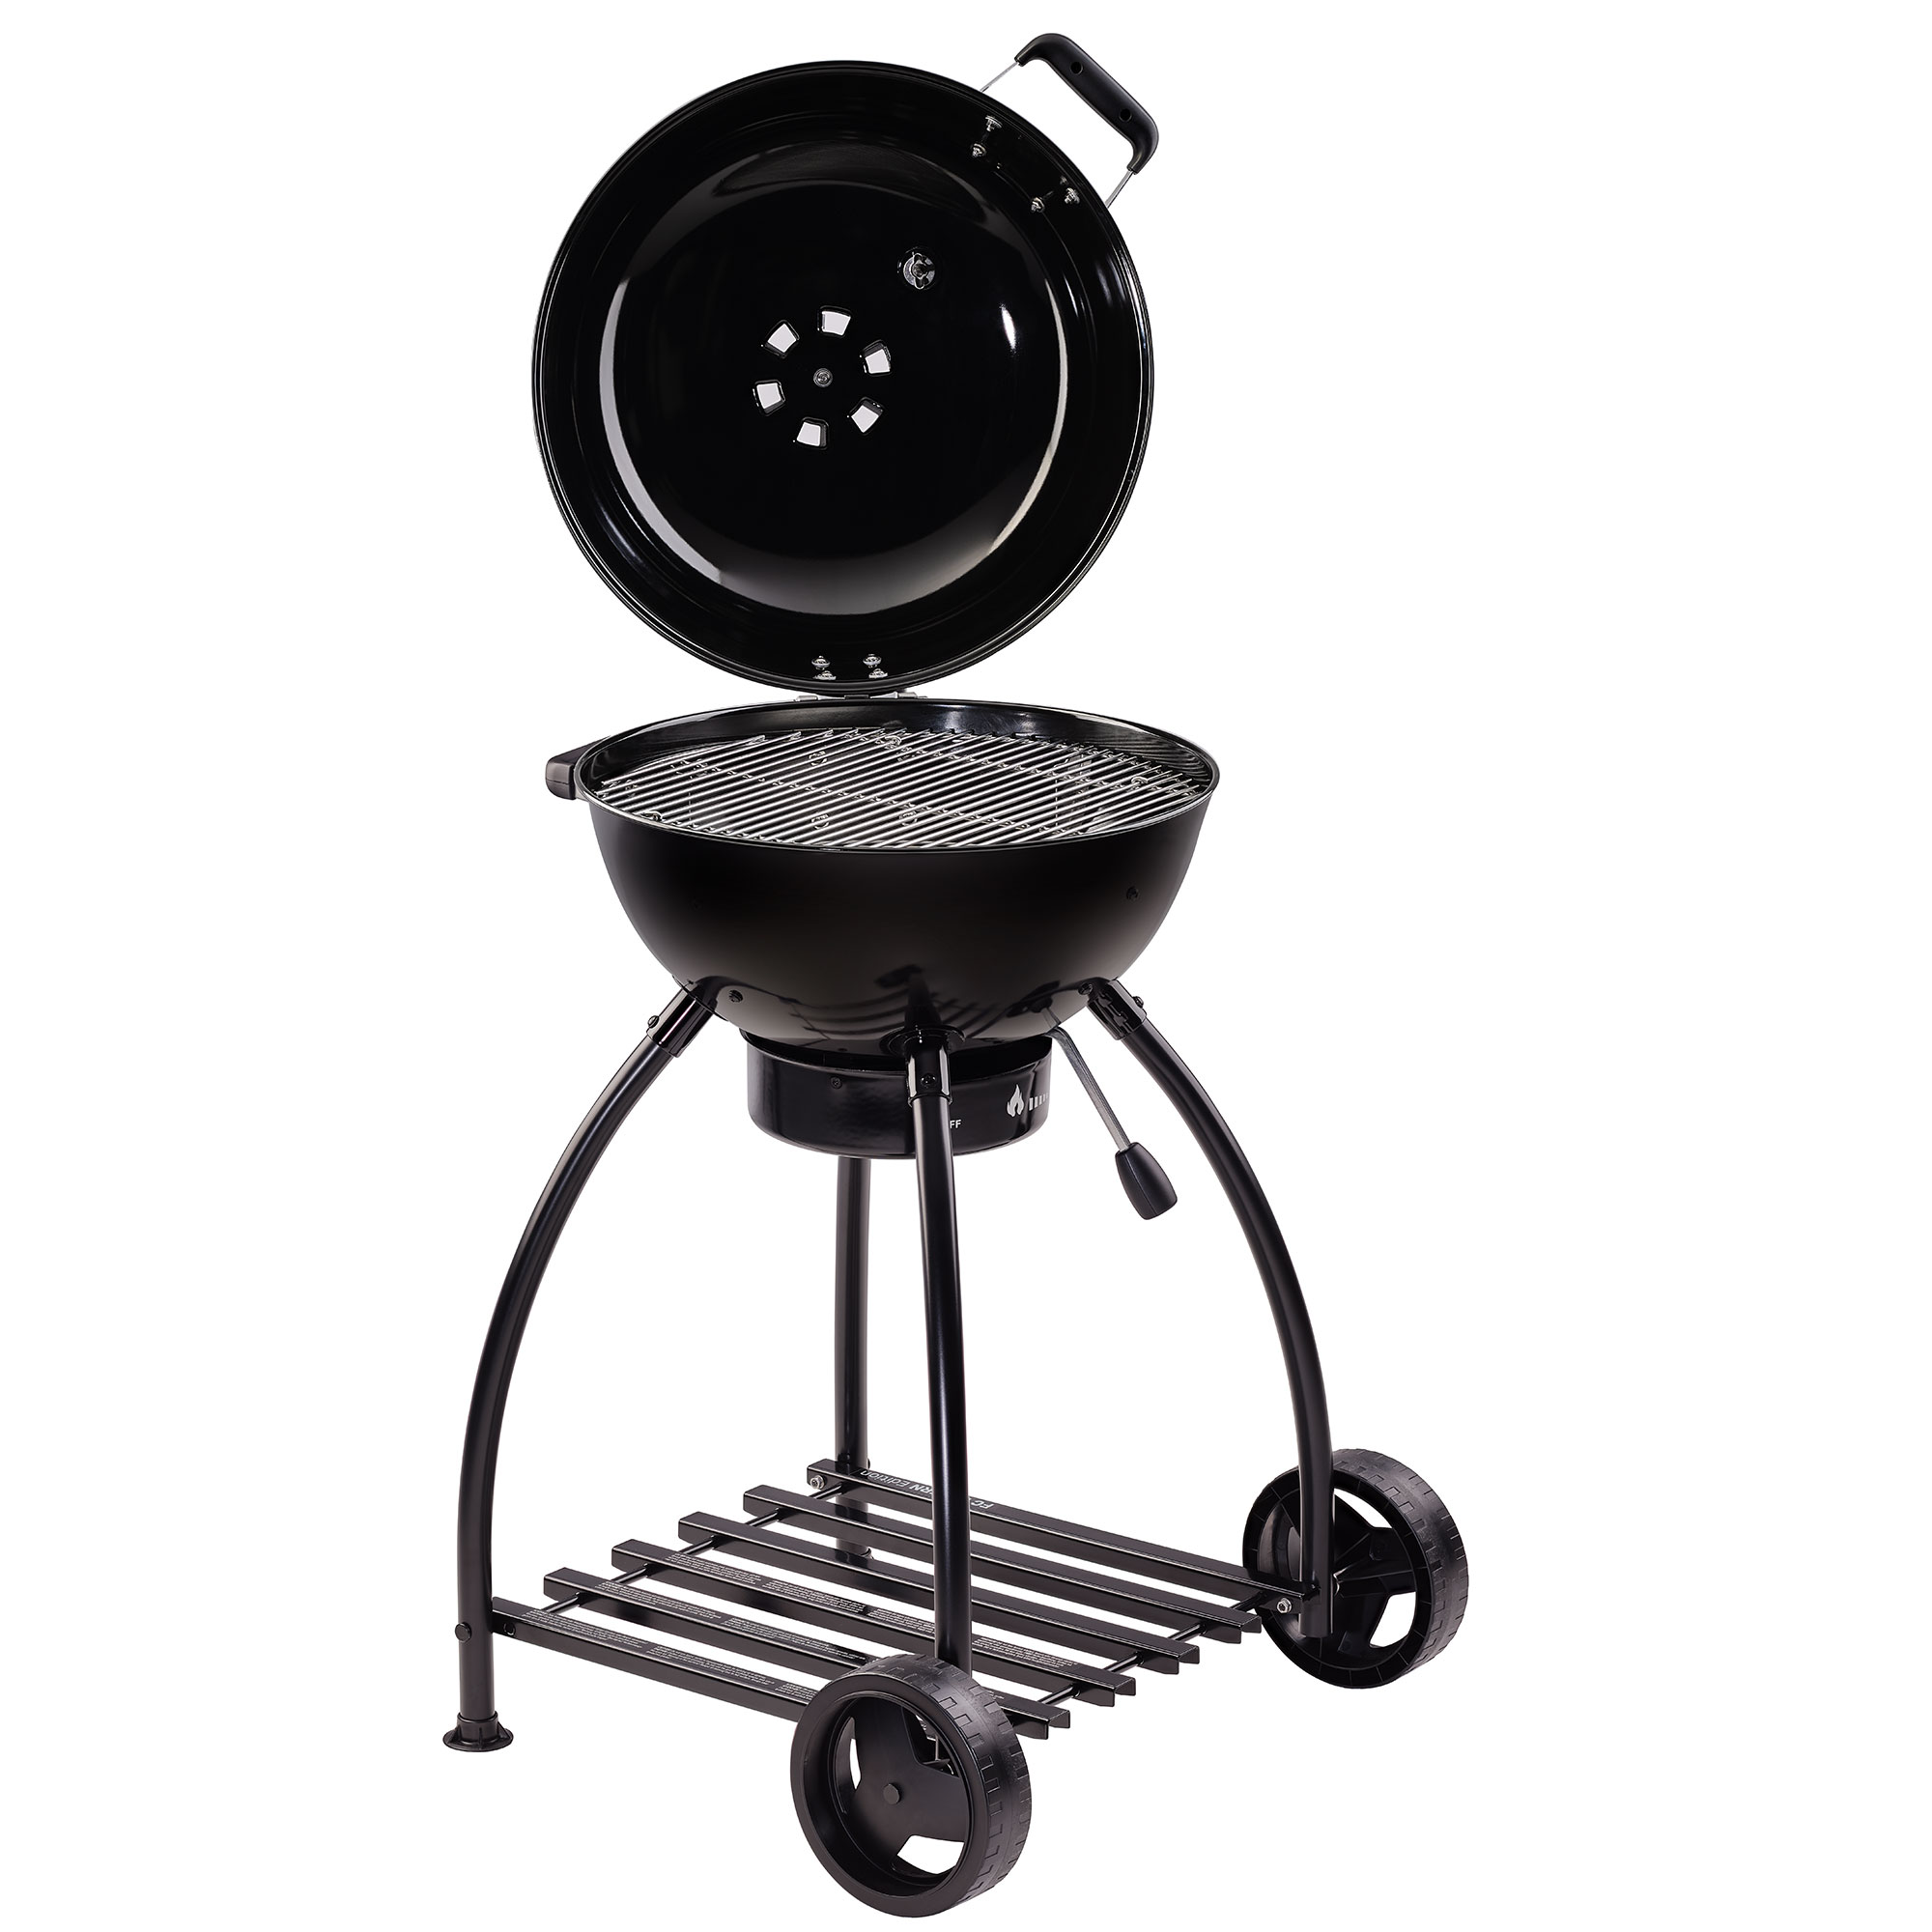 FC Bayern Edition - Charcoal Kettle Grill No.1 Sport F50 black (Ø 50 cm | 20 in.)